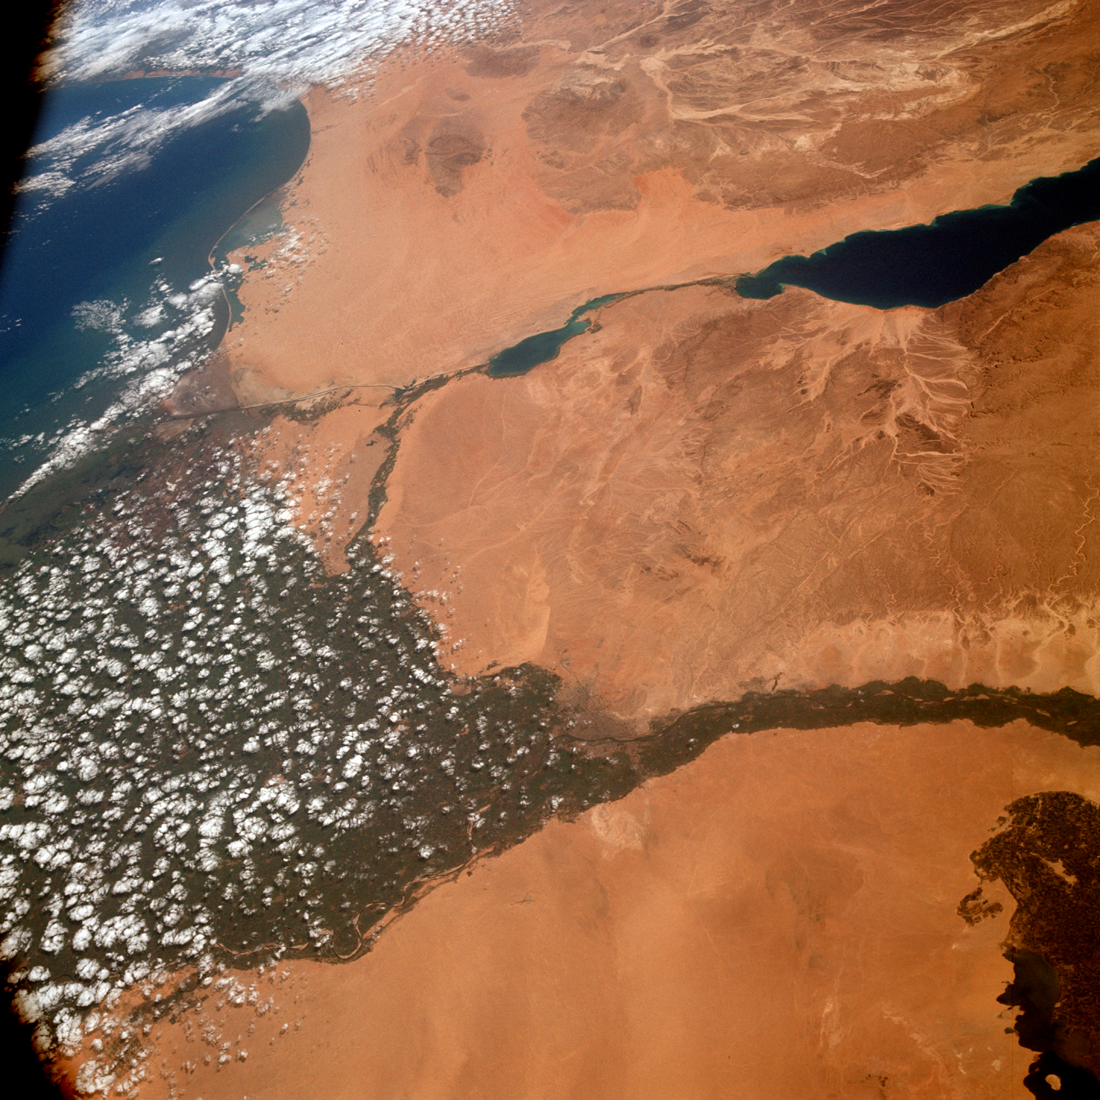 The Nile Delta with neighboring areas of Egypt, the Red Sea, and the Mediterranean Sea as imaged by the Apollo 9 crew for Experiment S065. North is to the left.